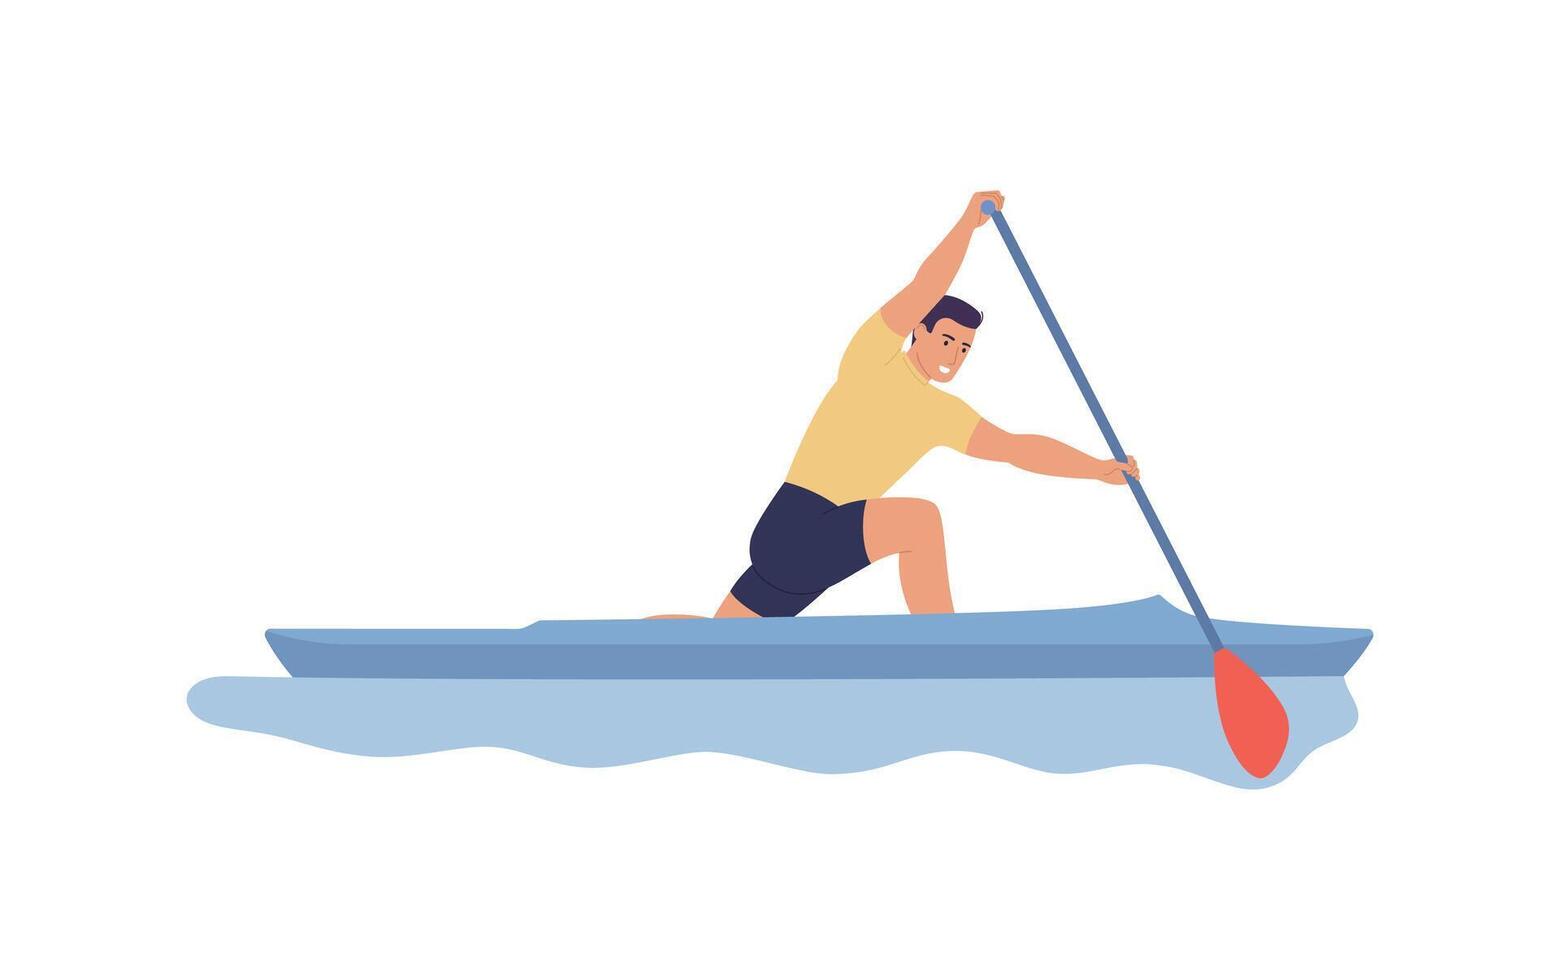 Young man in a boat floating on the river, the concept of rowing competitions, canoeing. Vector illustration in flat style.